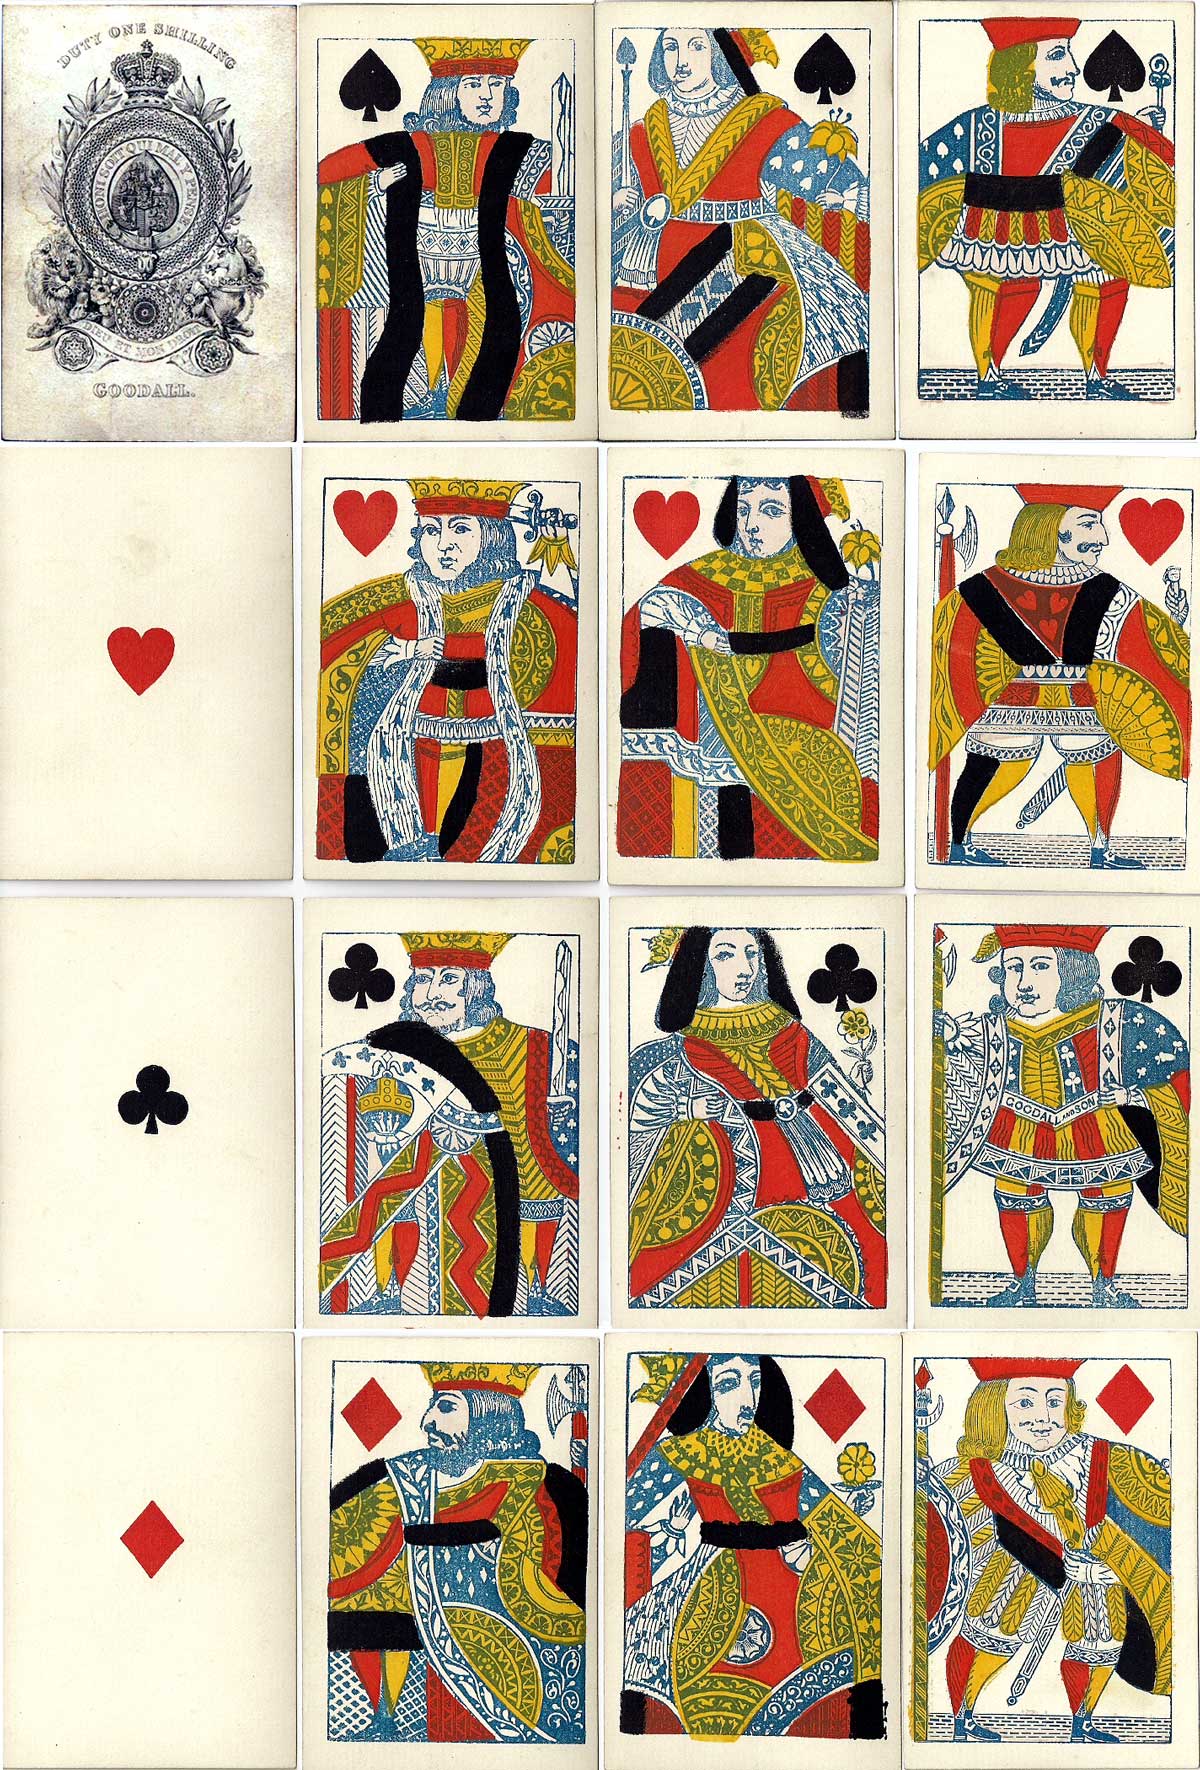 cards by Goodall and Son with modernised courts, c.1845-60